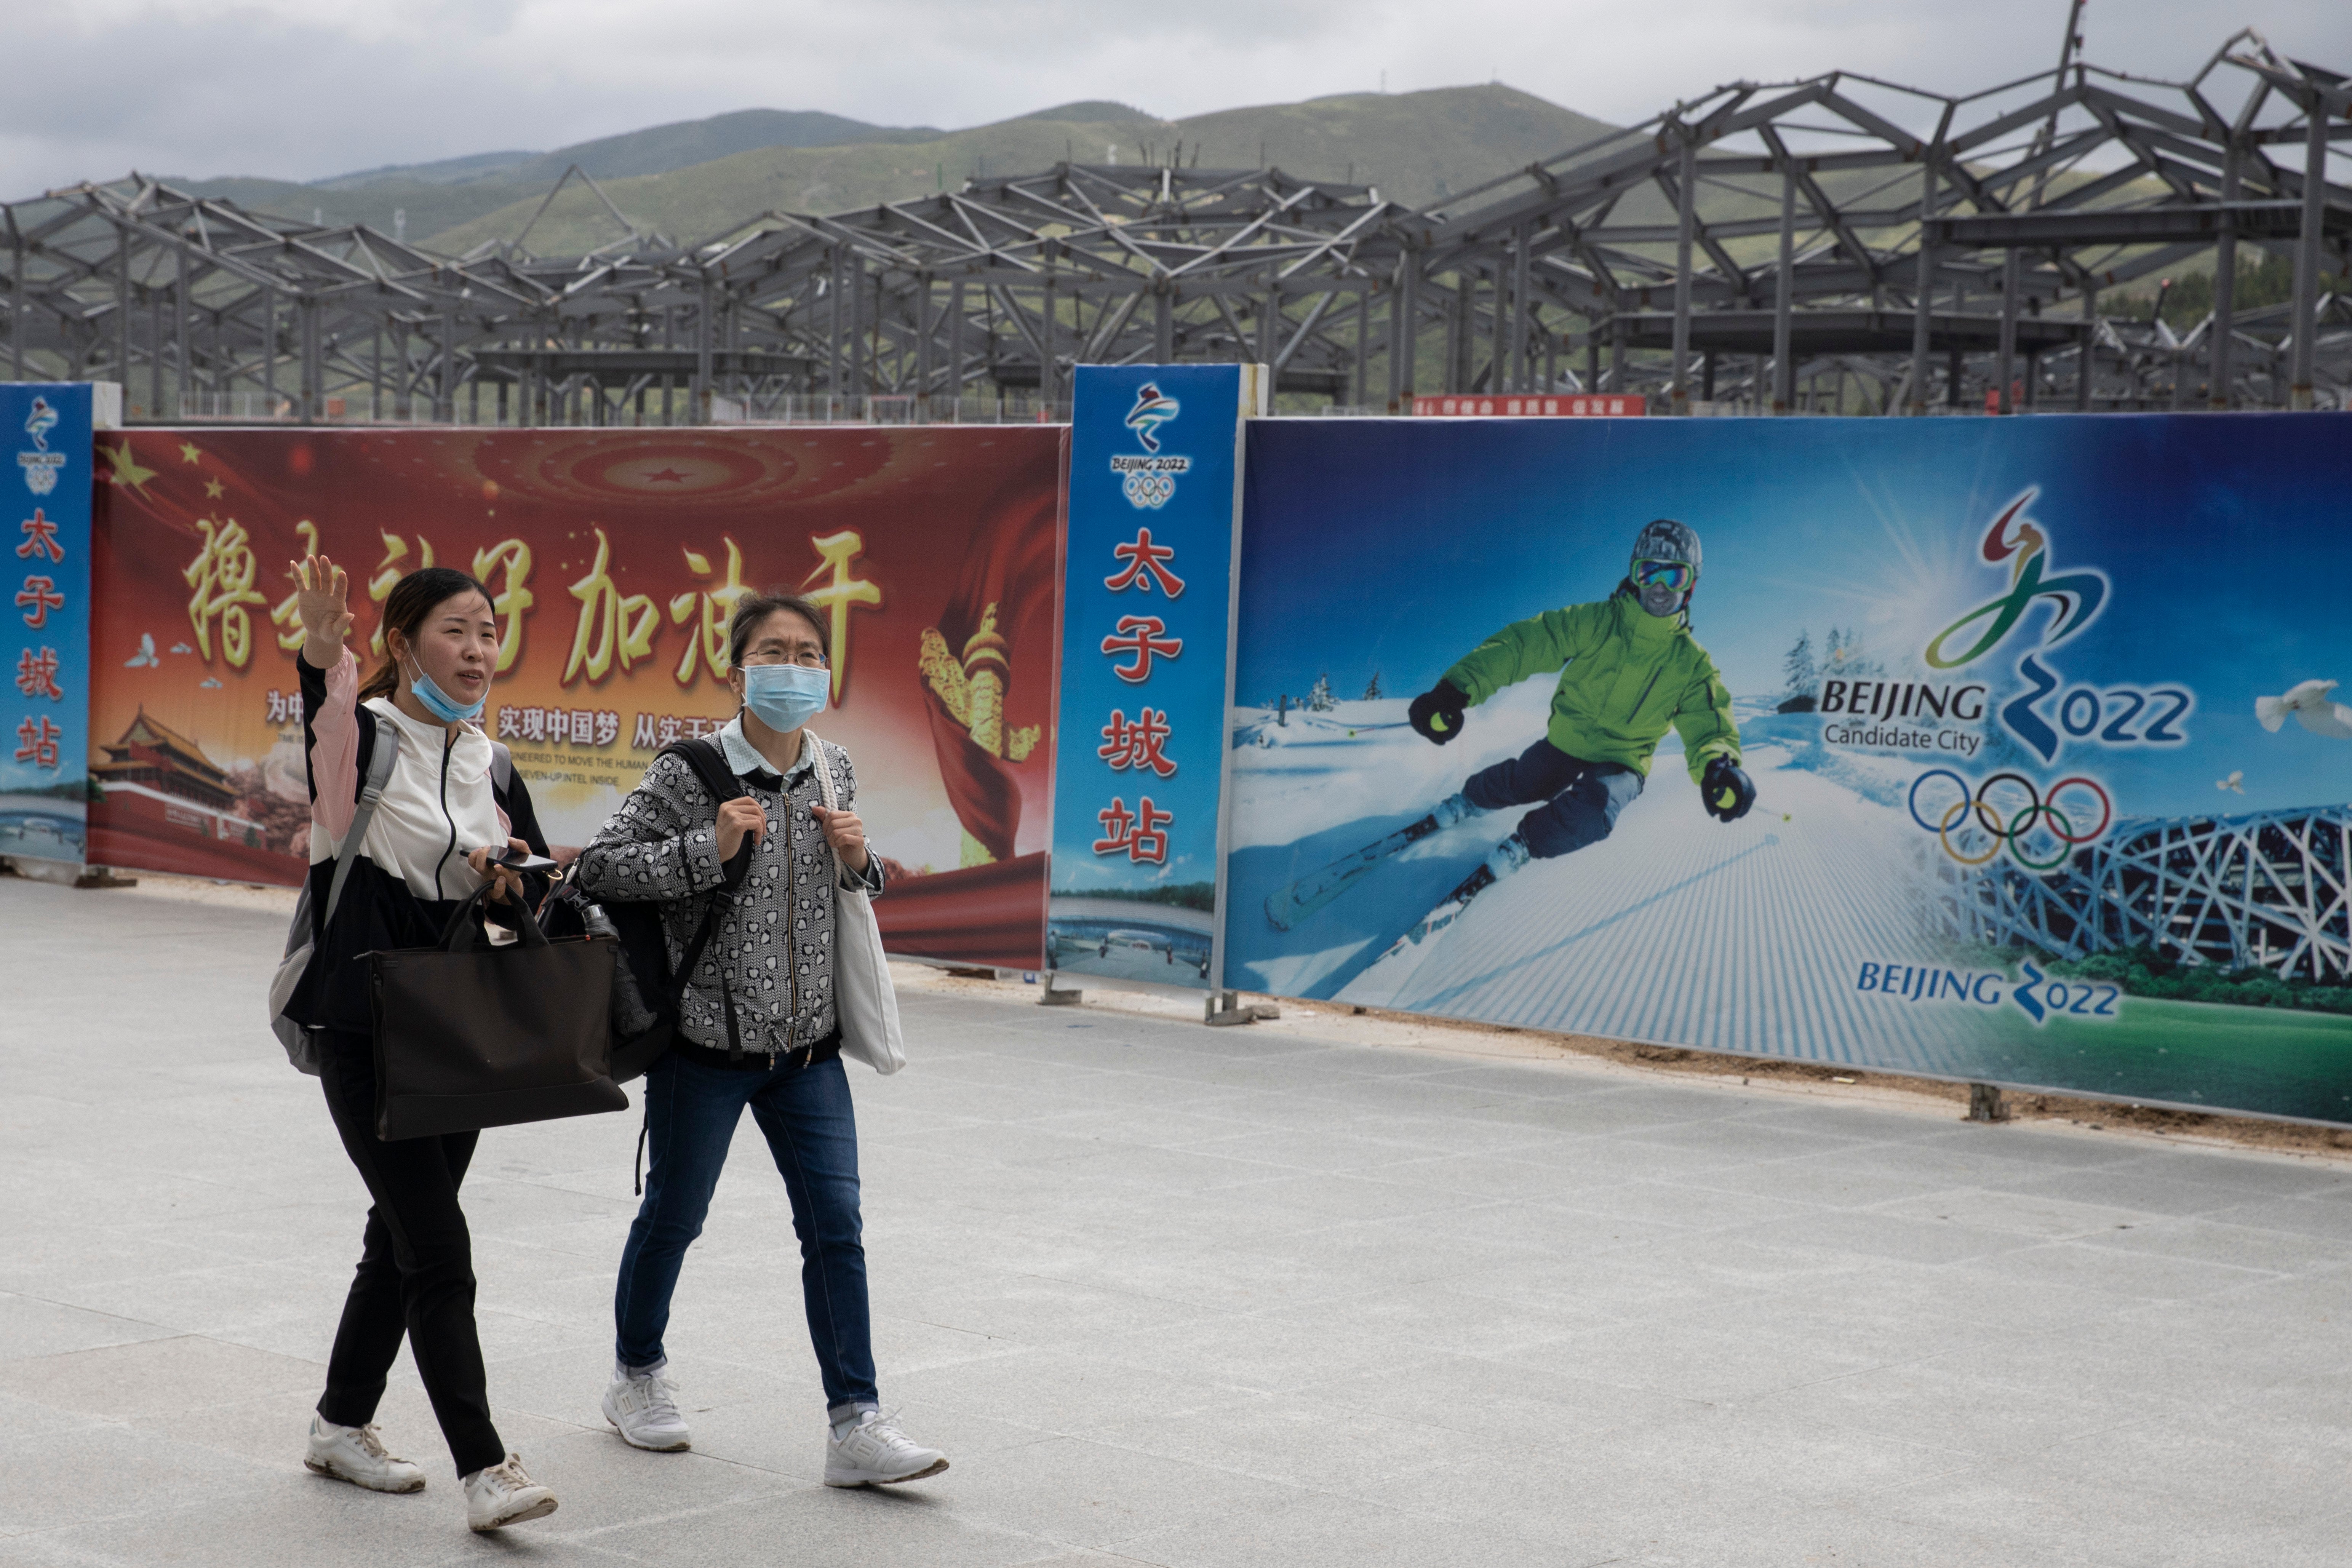 Beijing was a surprise host for the Olympics due to no heritage with the Winter Games